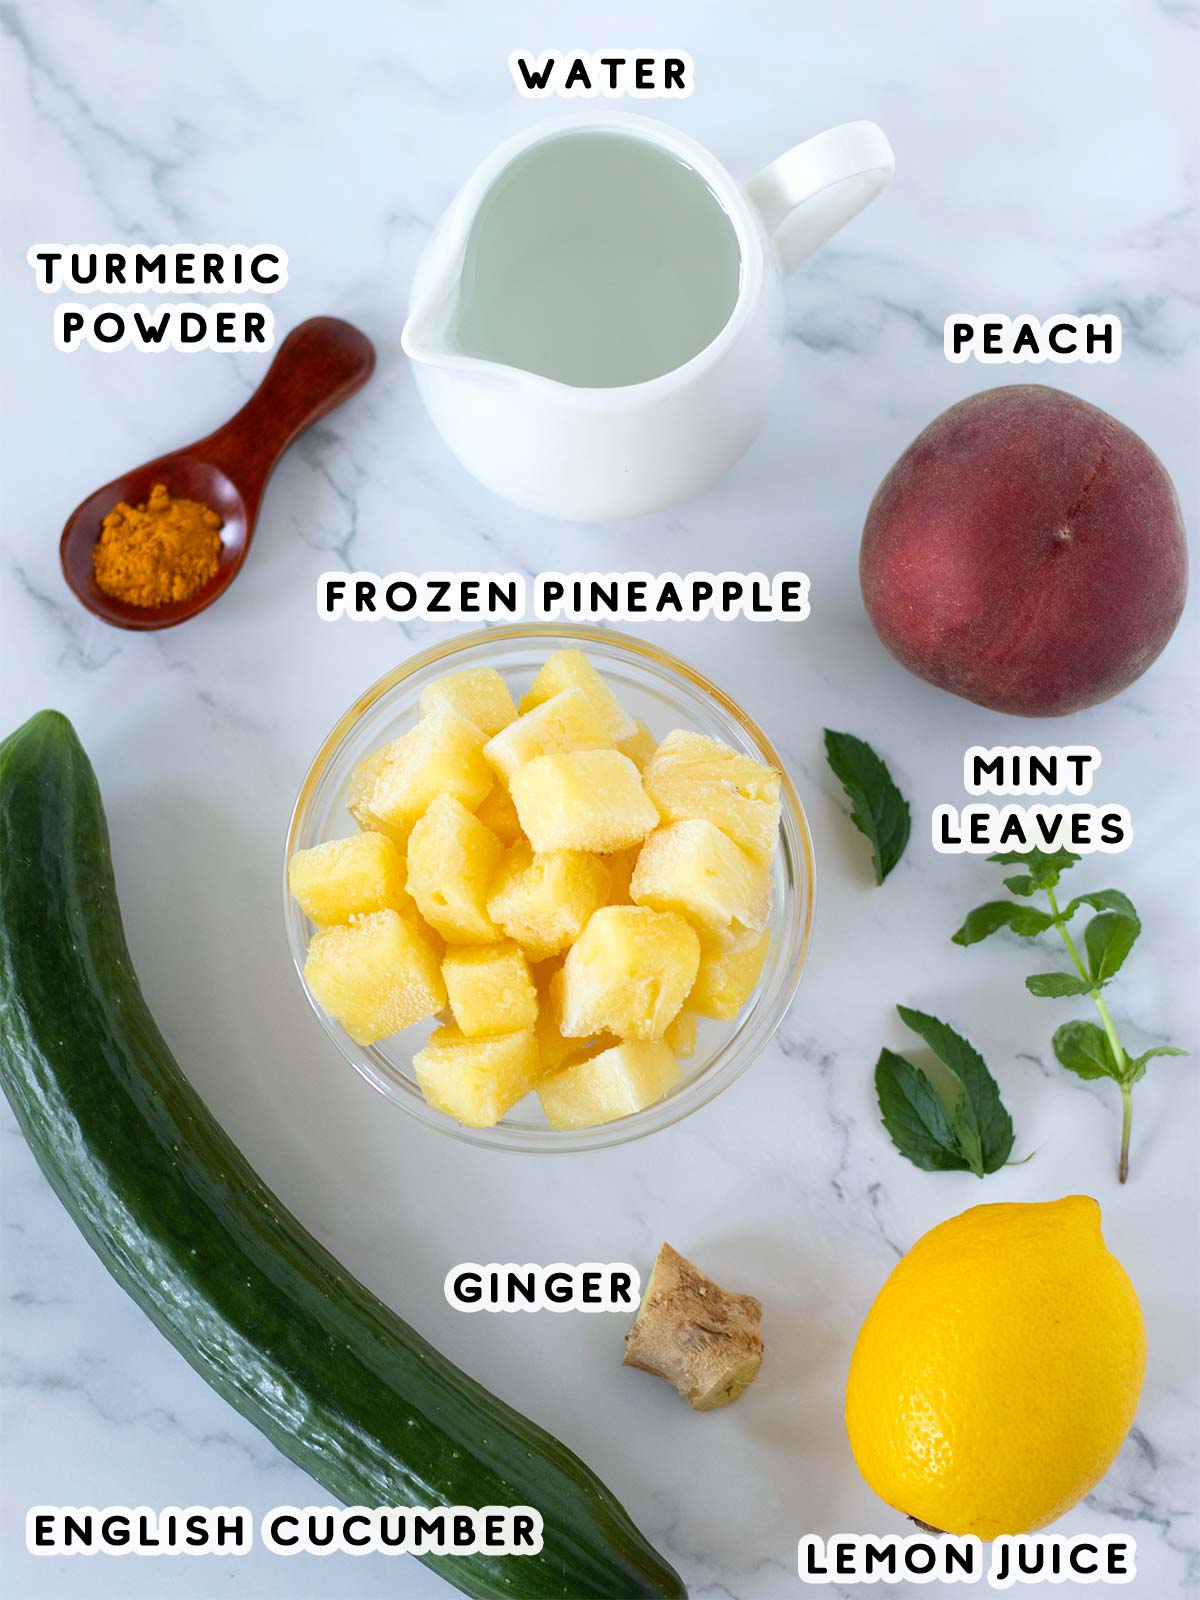 Simple fat-burning ingredients for making healthy pineapple cucumber peach and ginger drink to lose weight.